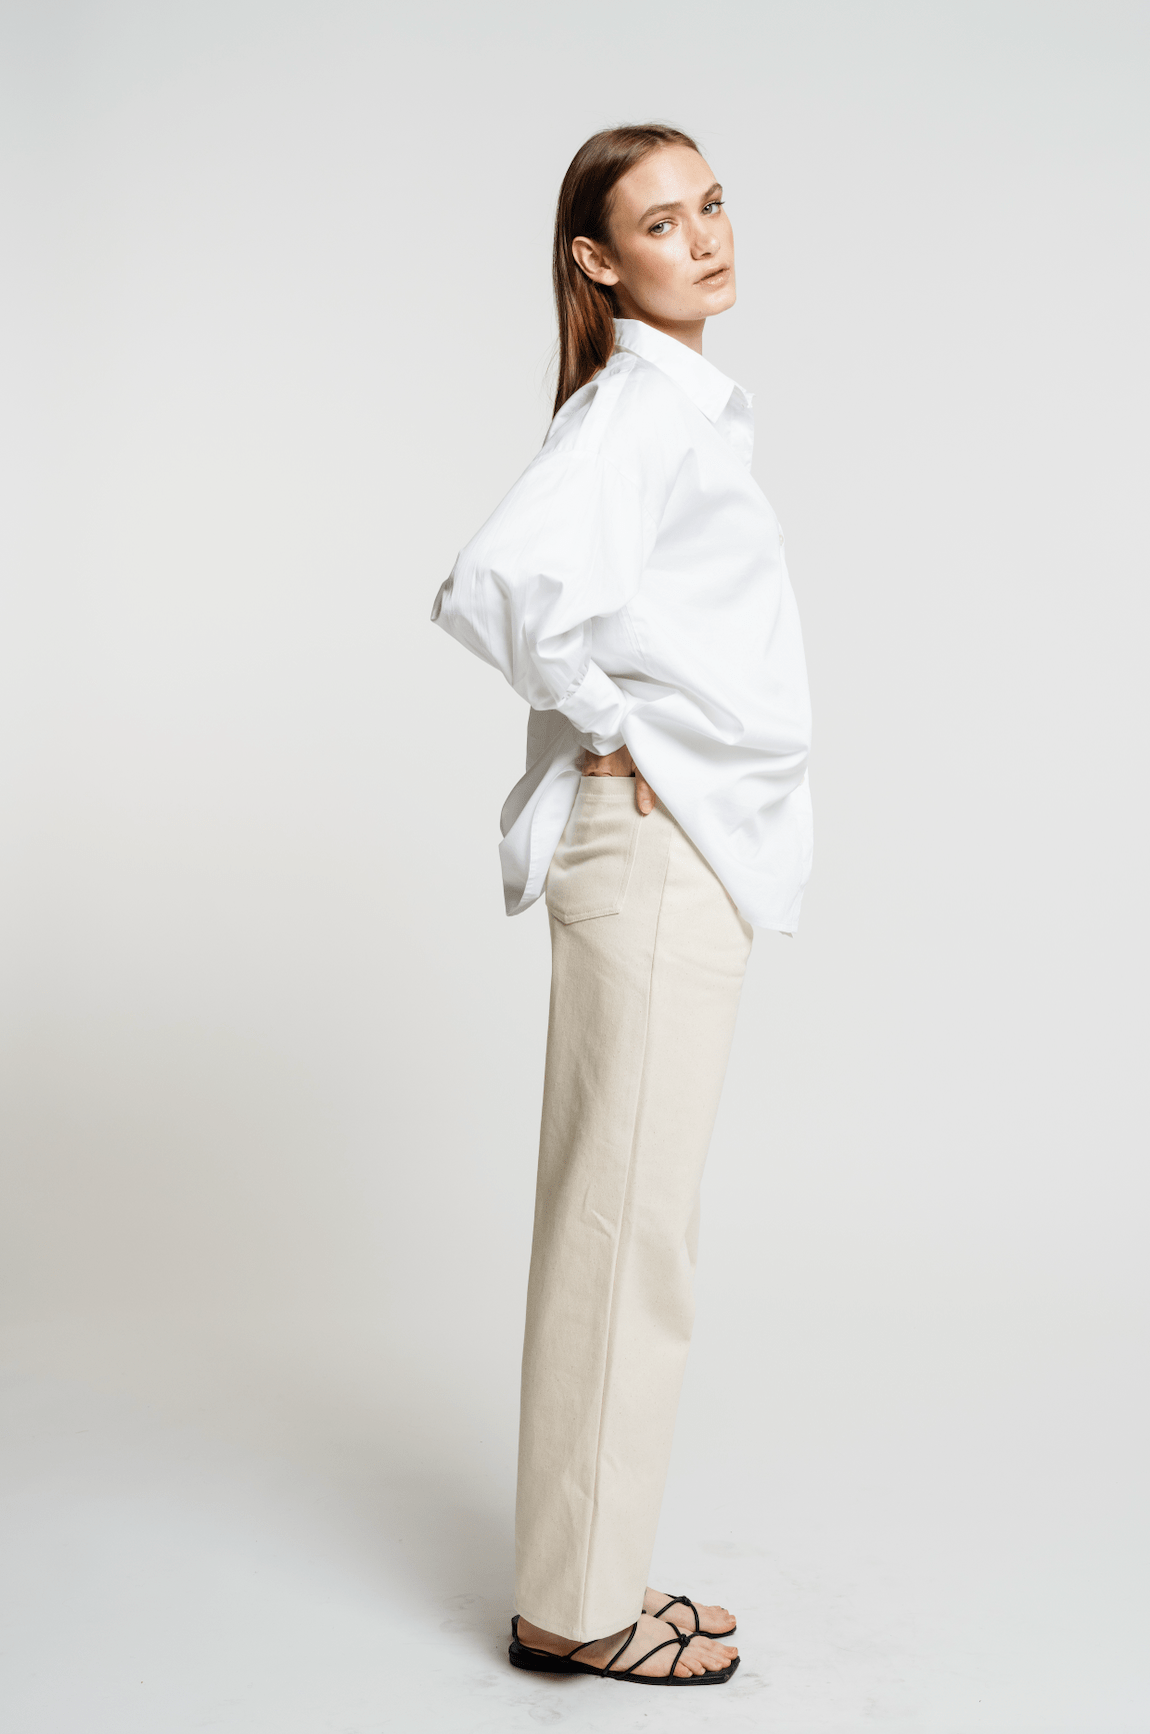 A model wearing the Museo Button Up - White shirt and beige pants.